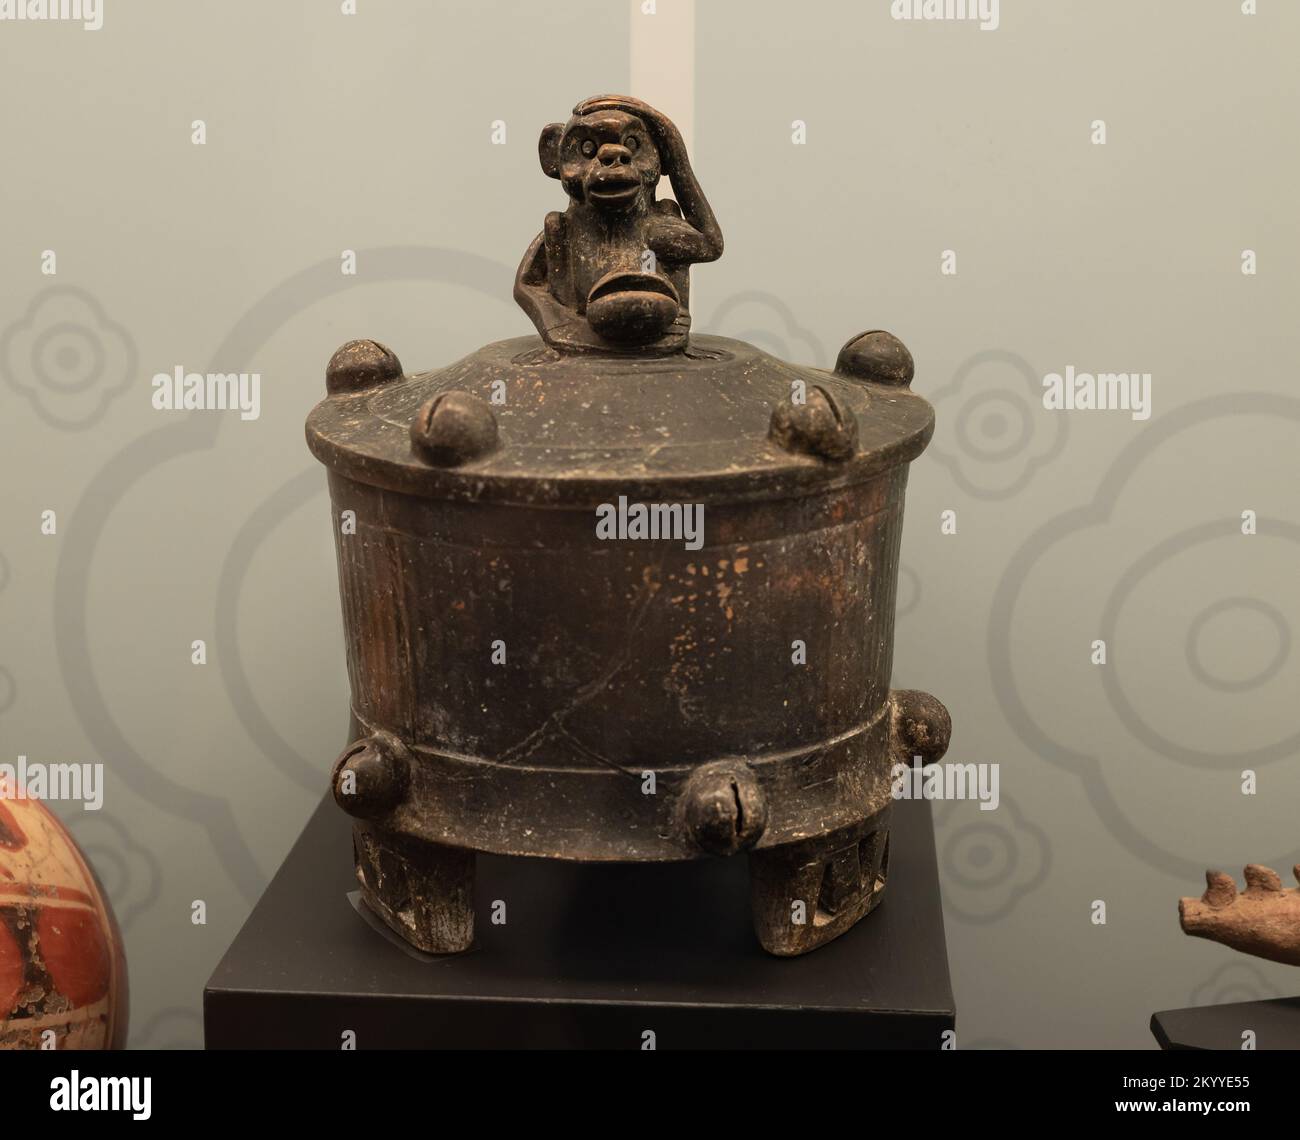 Ceramic Mayan pot with a monkey figure on top, from the early classic period. Campeche, Mexico. Stock Photo